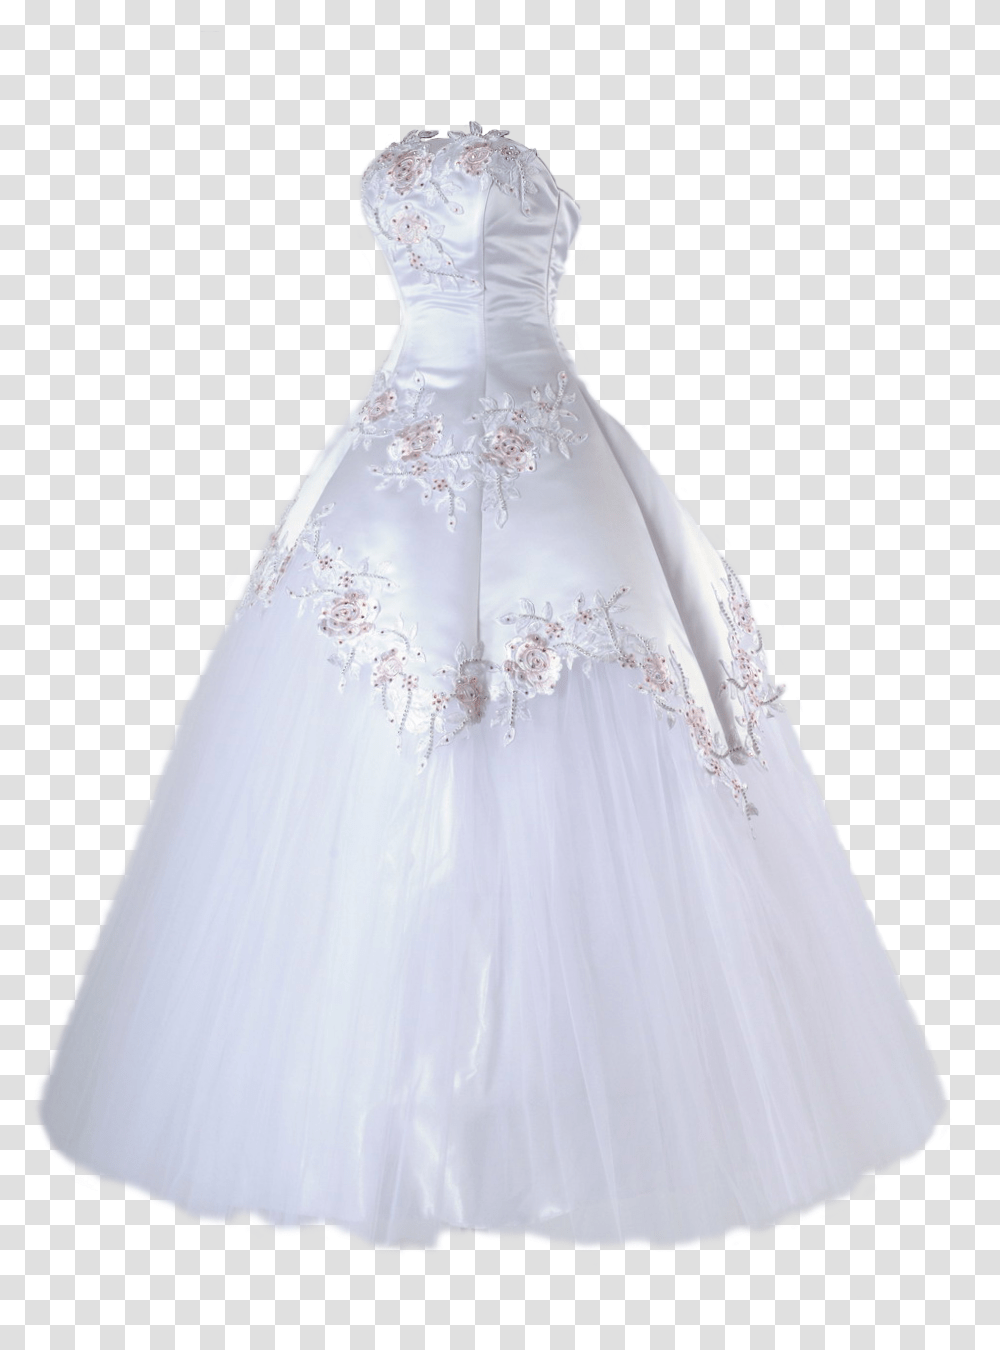 Wedding Dress Clothing Cocktail Dress, Apparel, Wedding Gown, Robe, Fashion Transparent Png